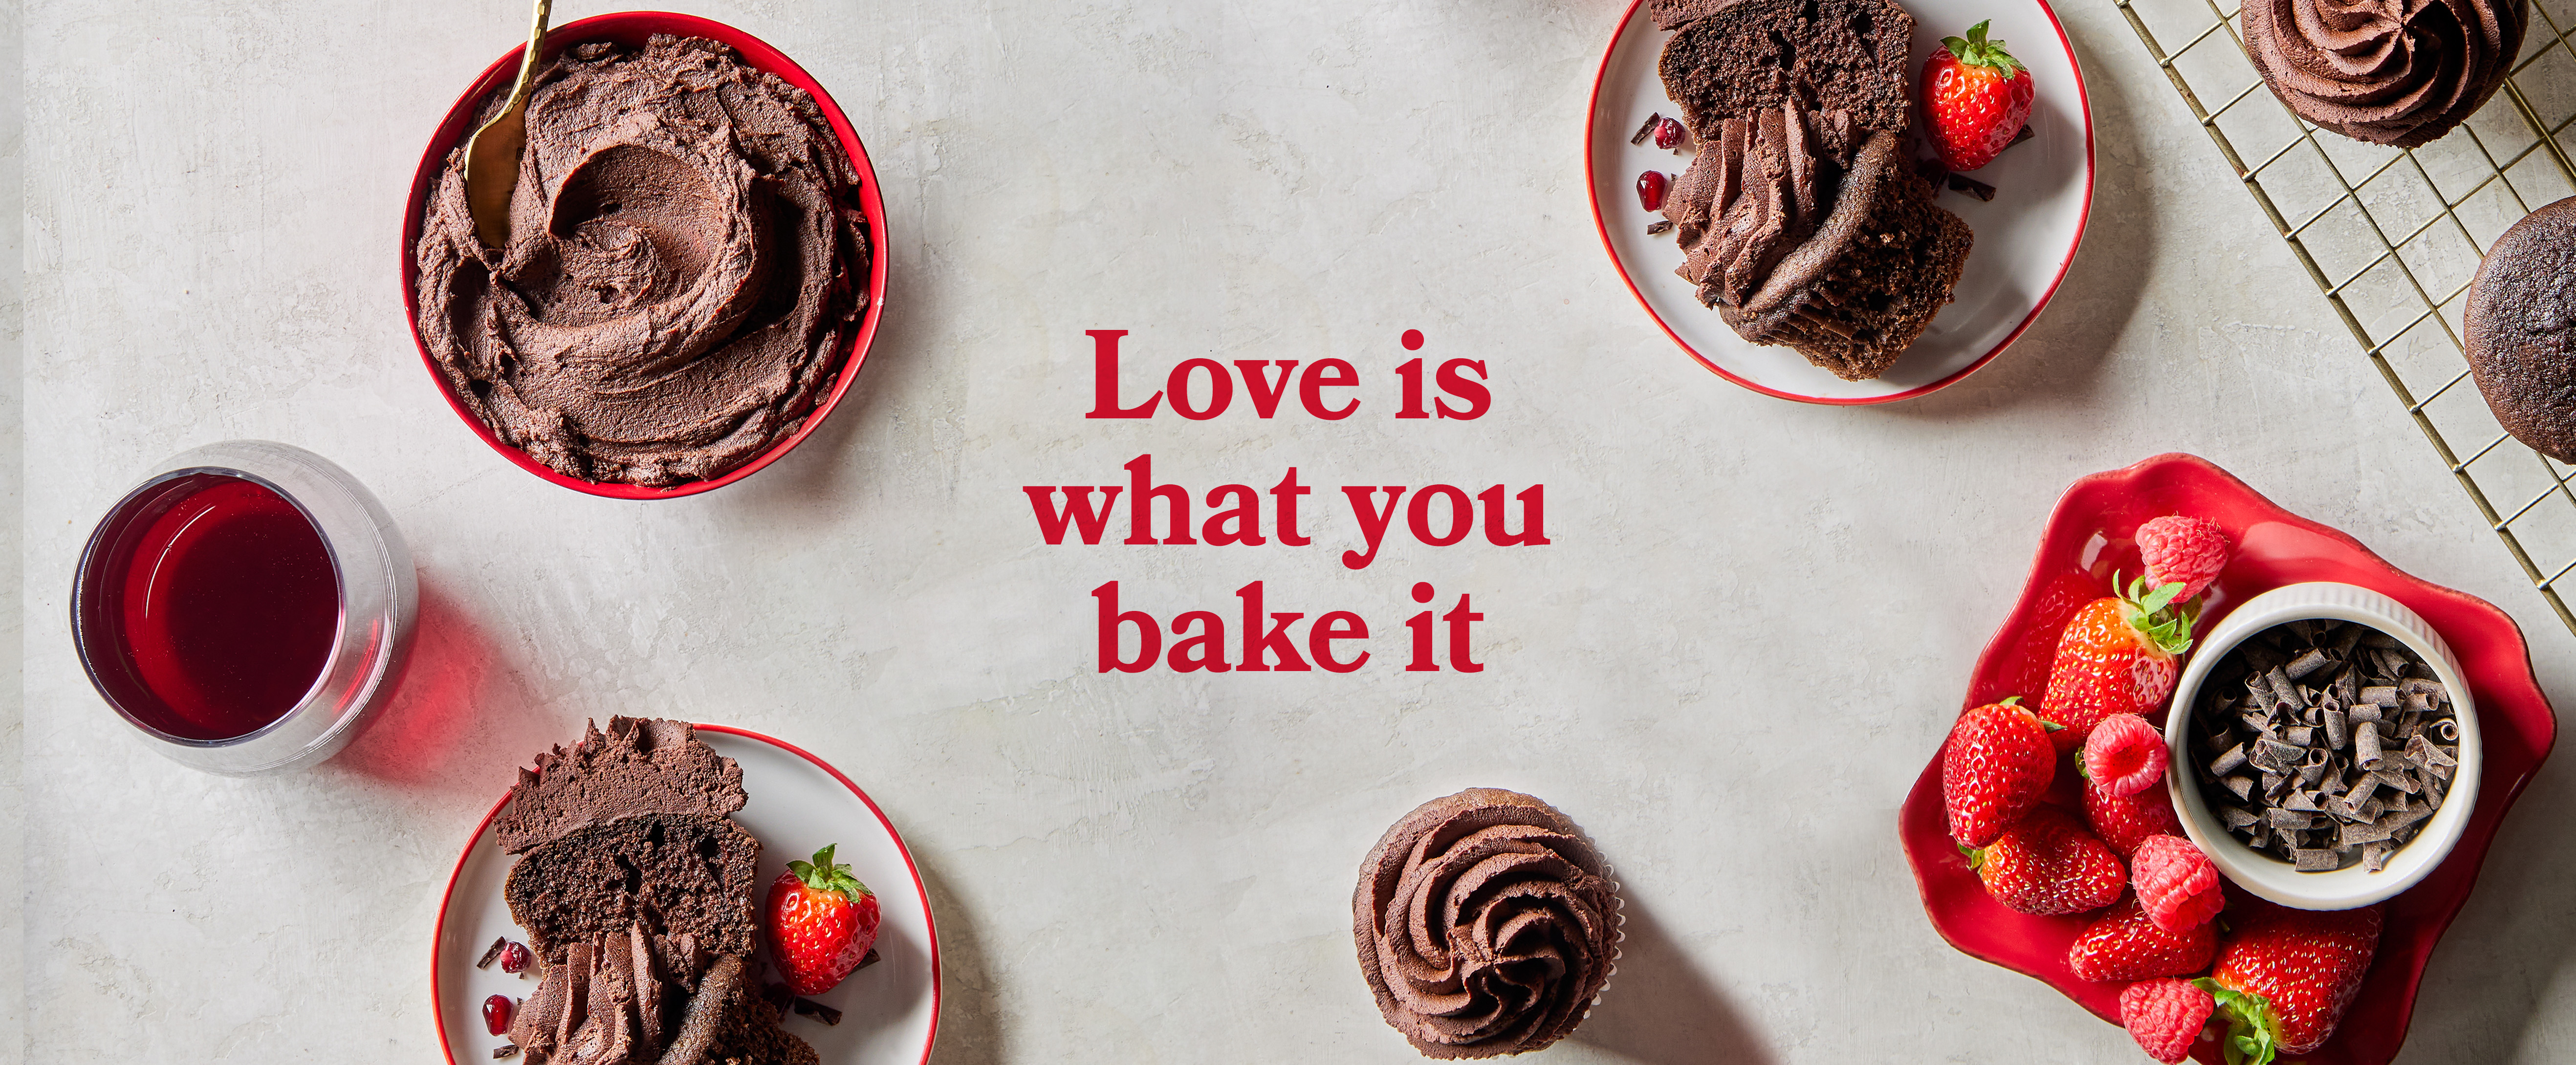 Flatlay of red wine cupcakes with text Love is what you bake it